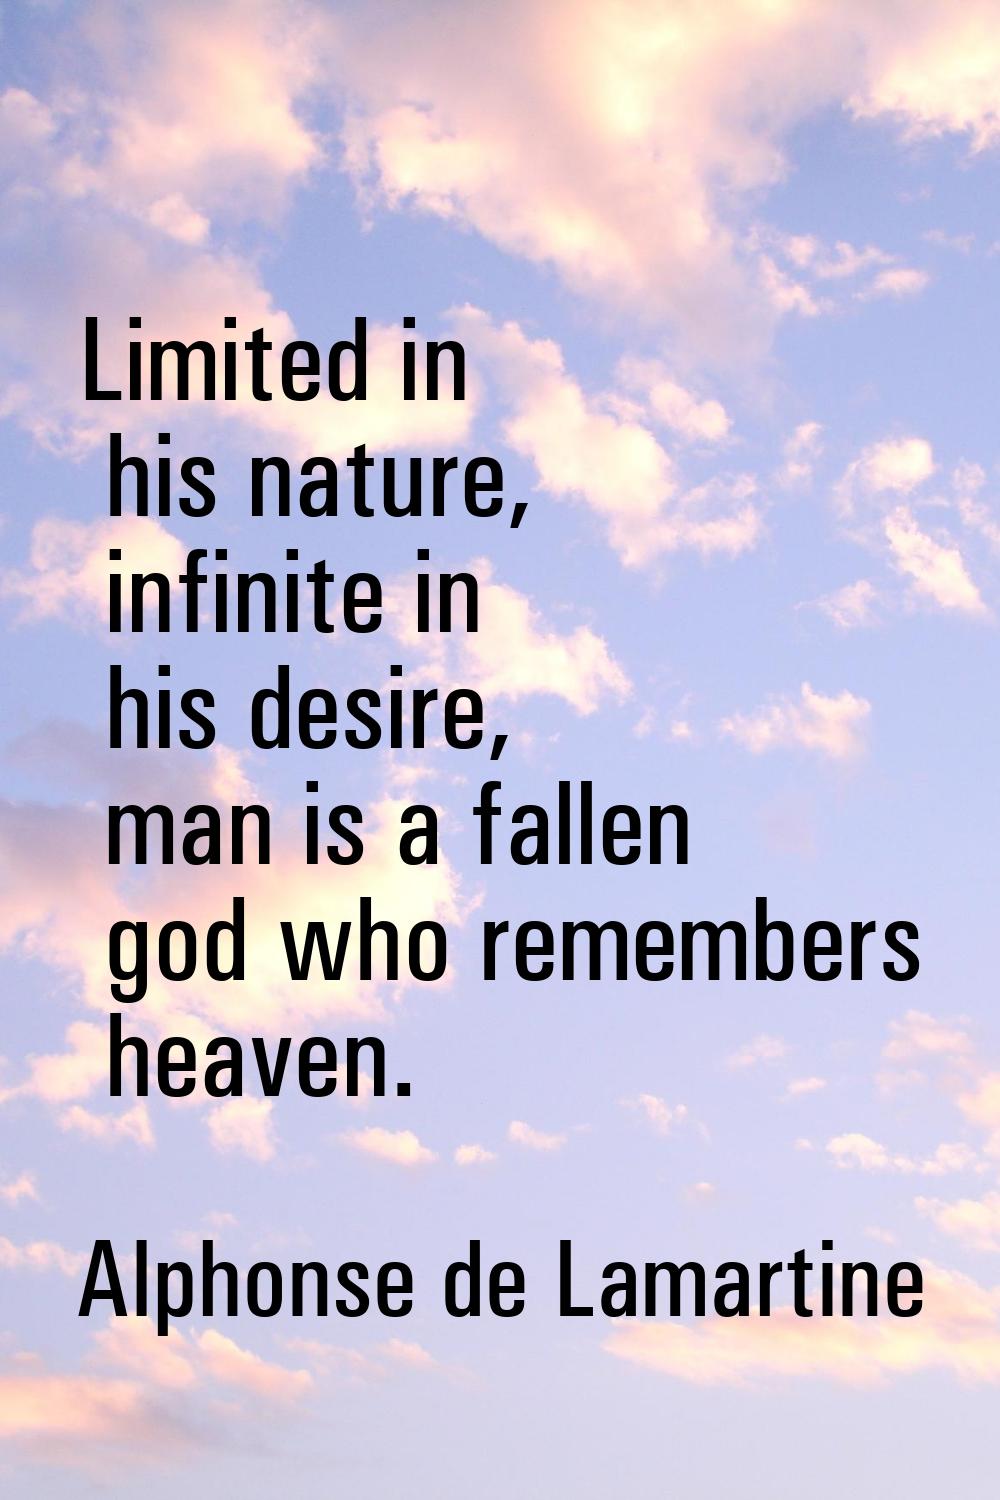 Limited in his nature, infinite in his desire, man is a fallen god who remembers heaven.